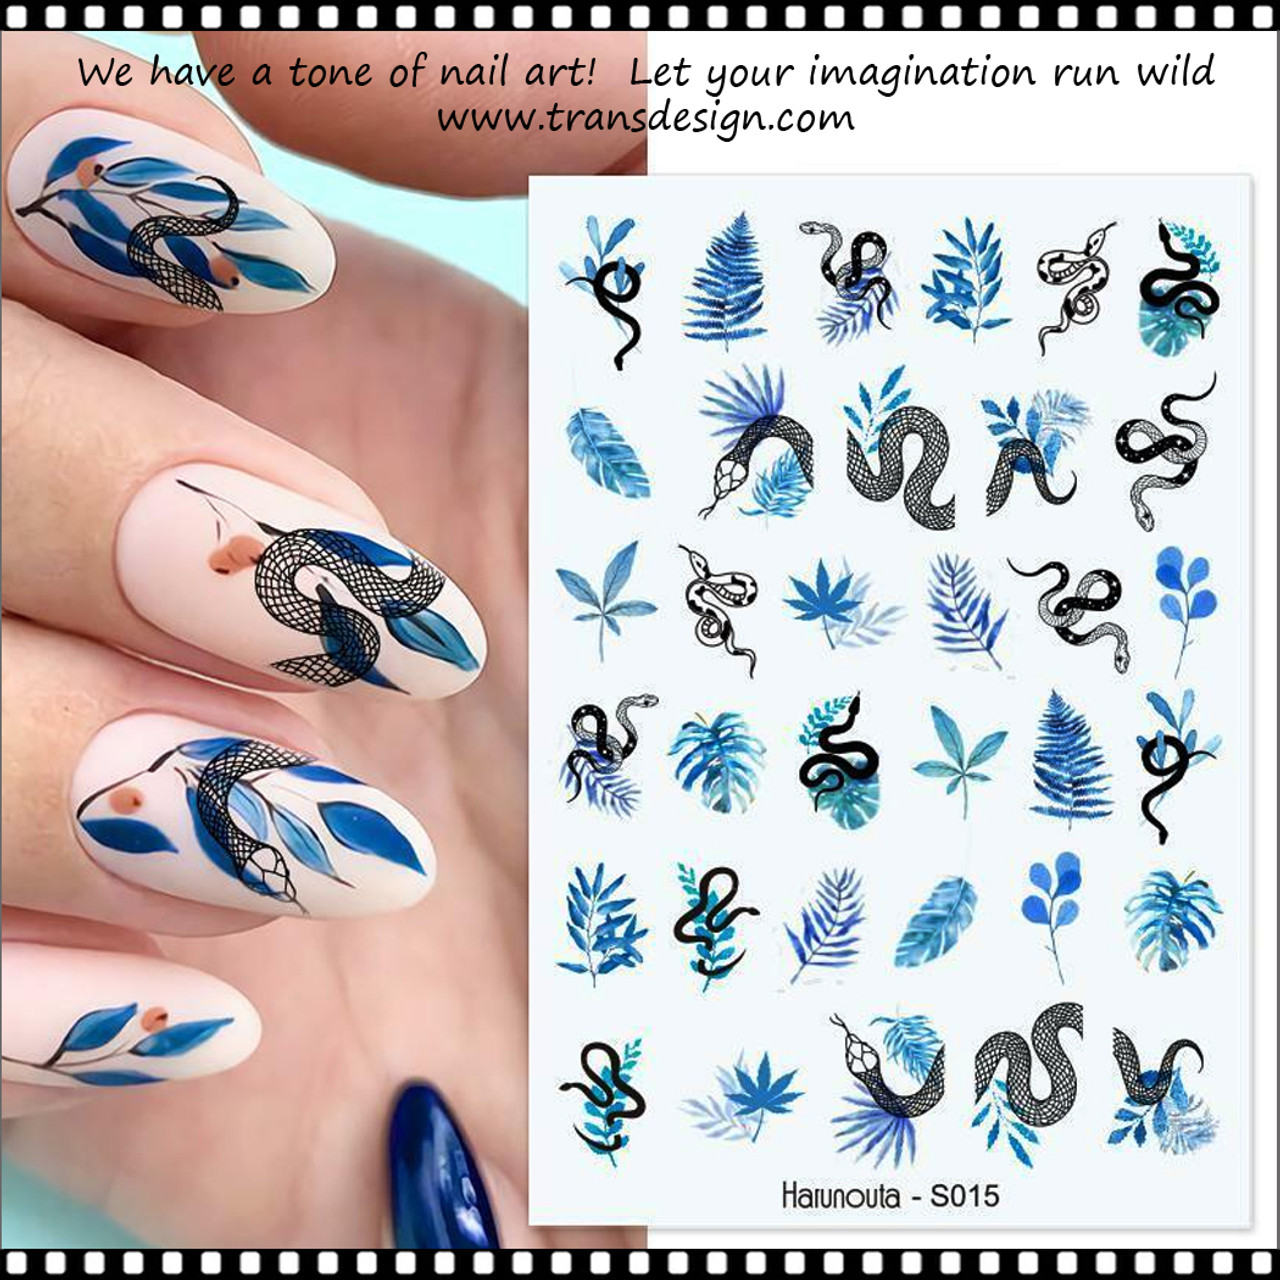 Buy Koi Fish Nail Art Decals Online in India - Etsy